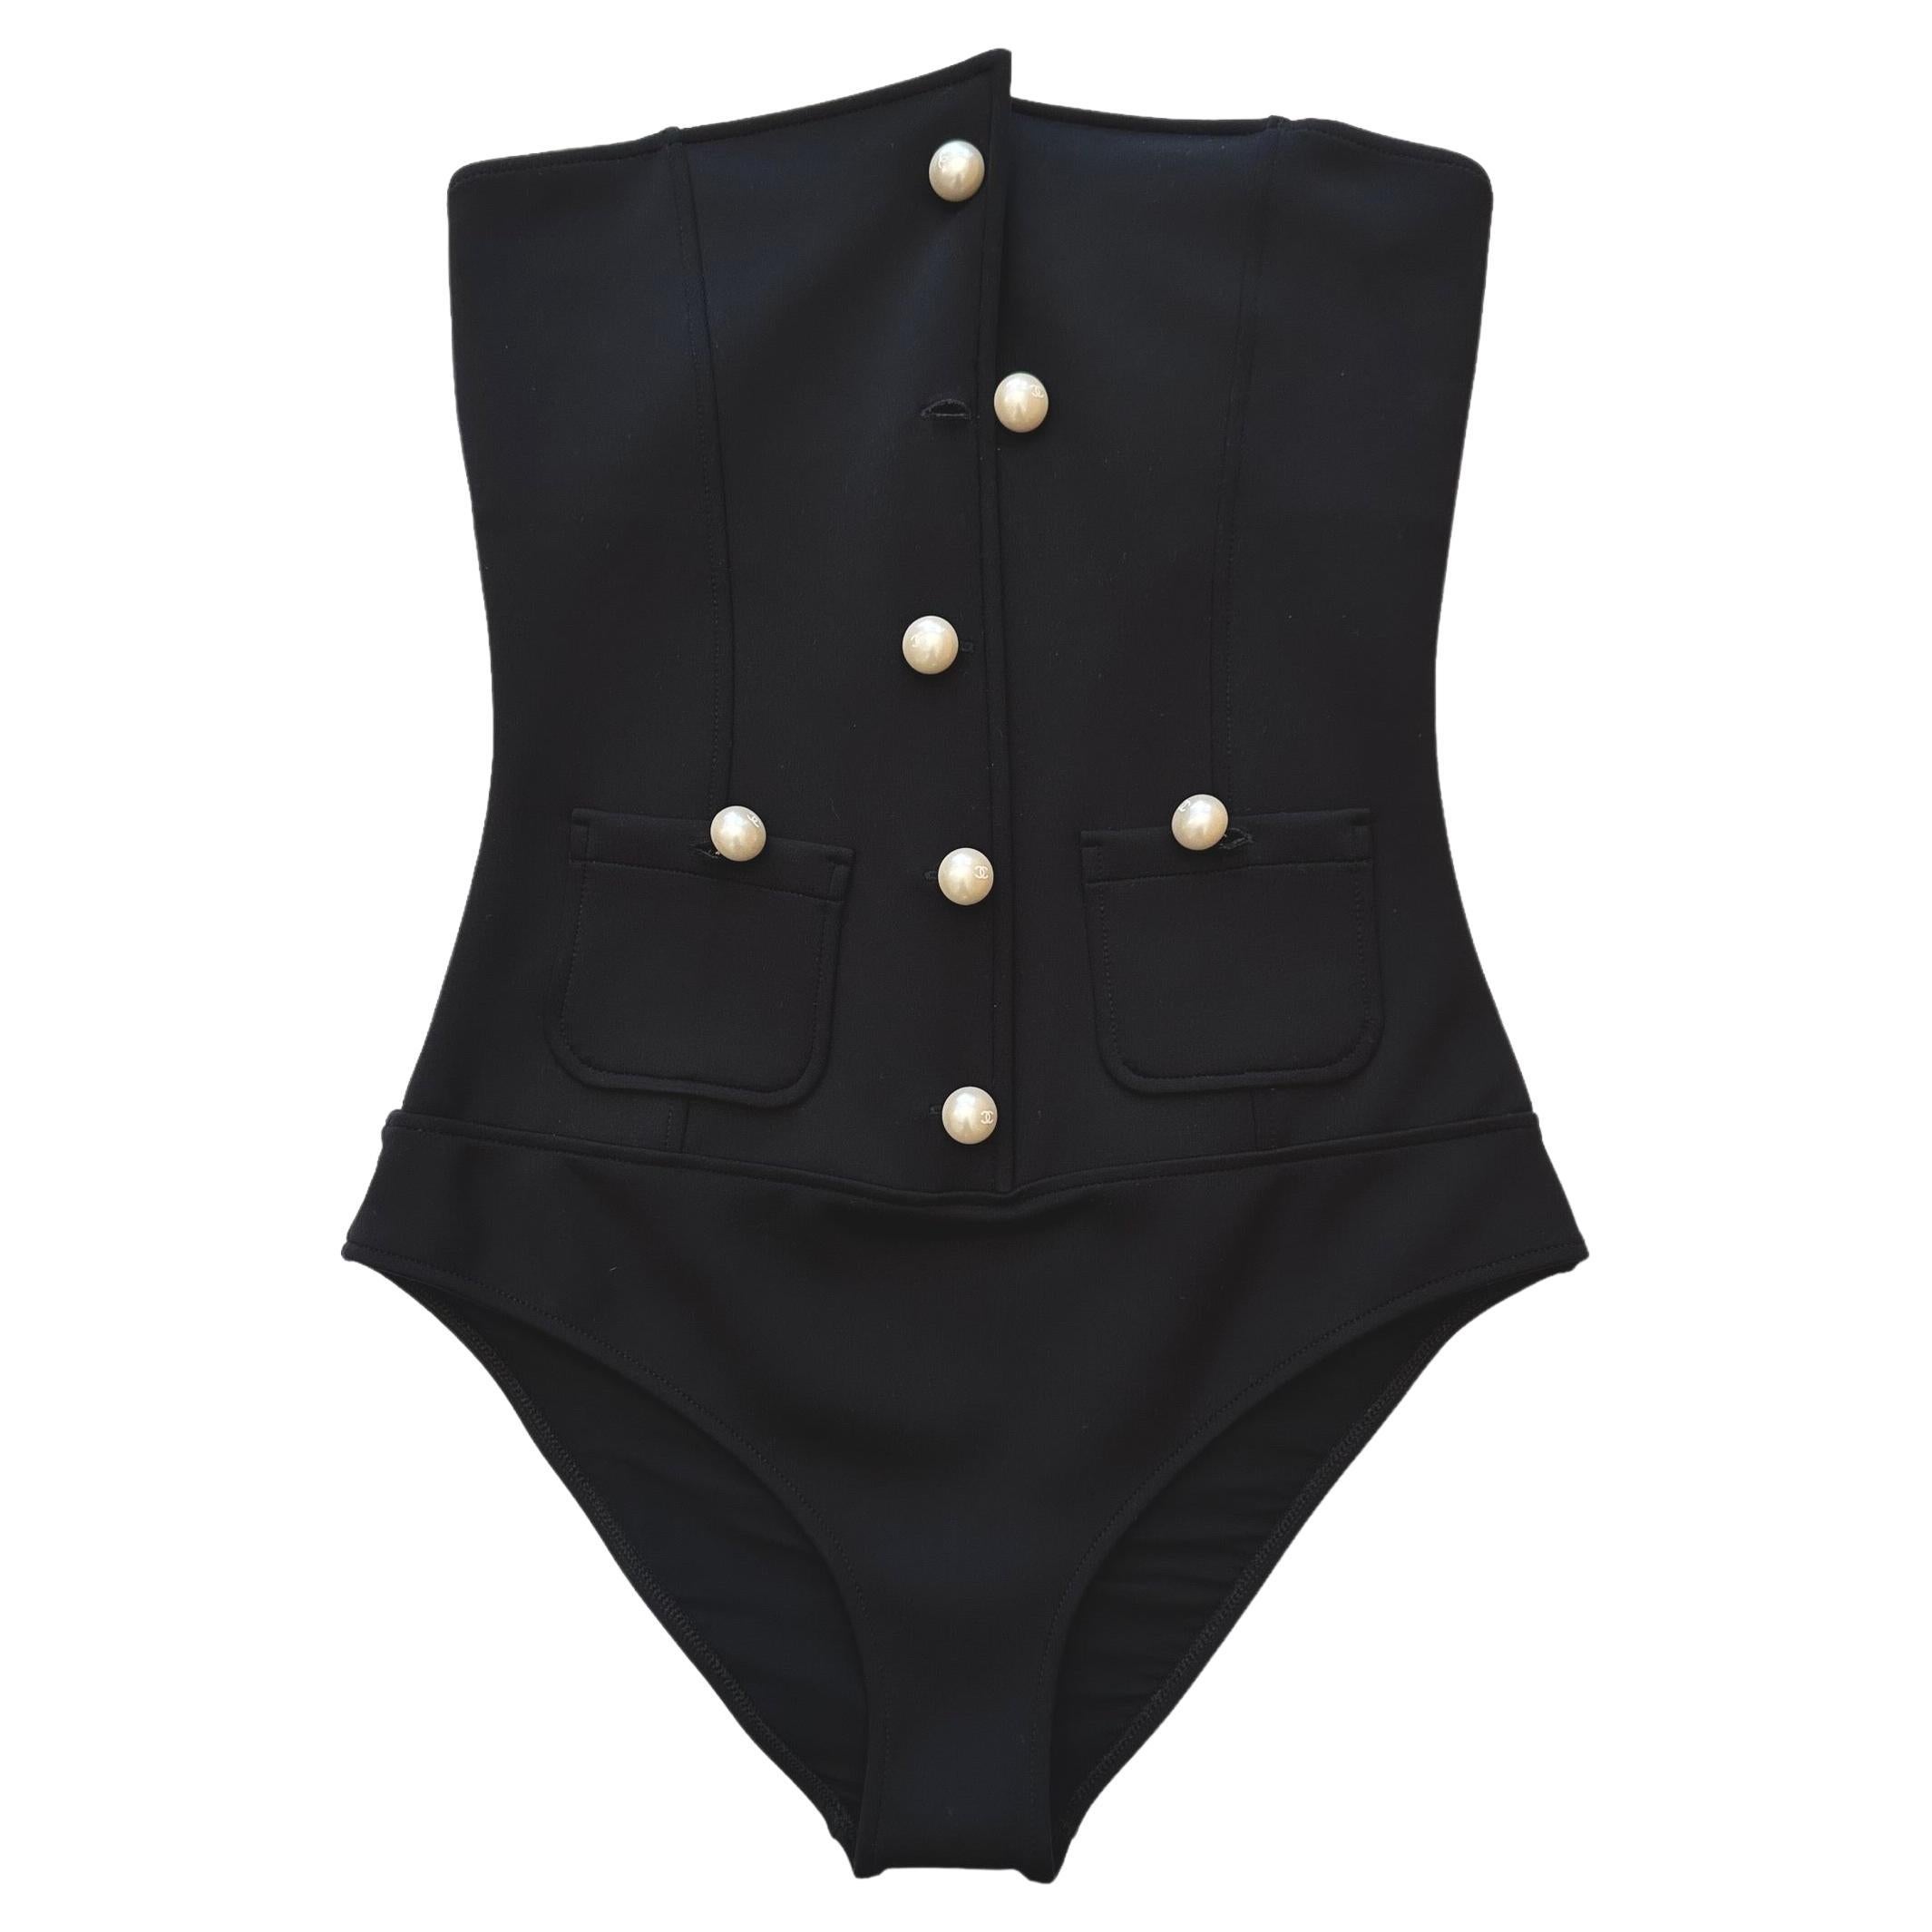 Chanel Iconic Black Body One-Piece Swimsuit